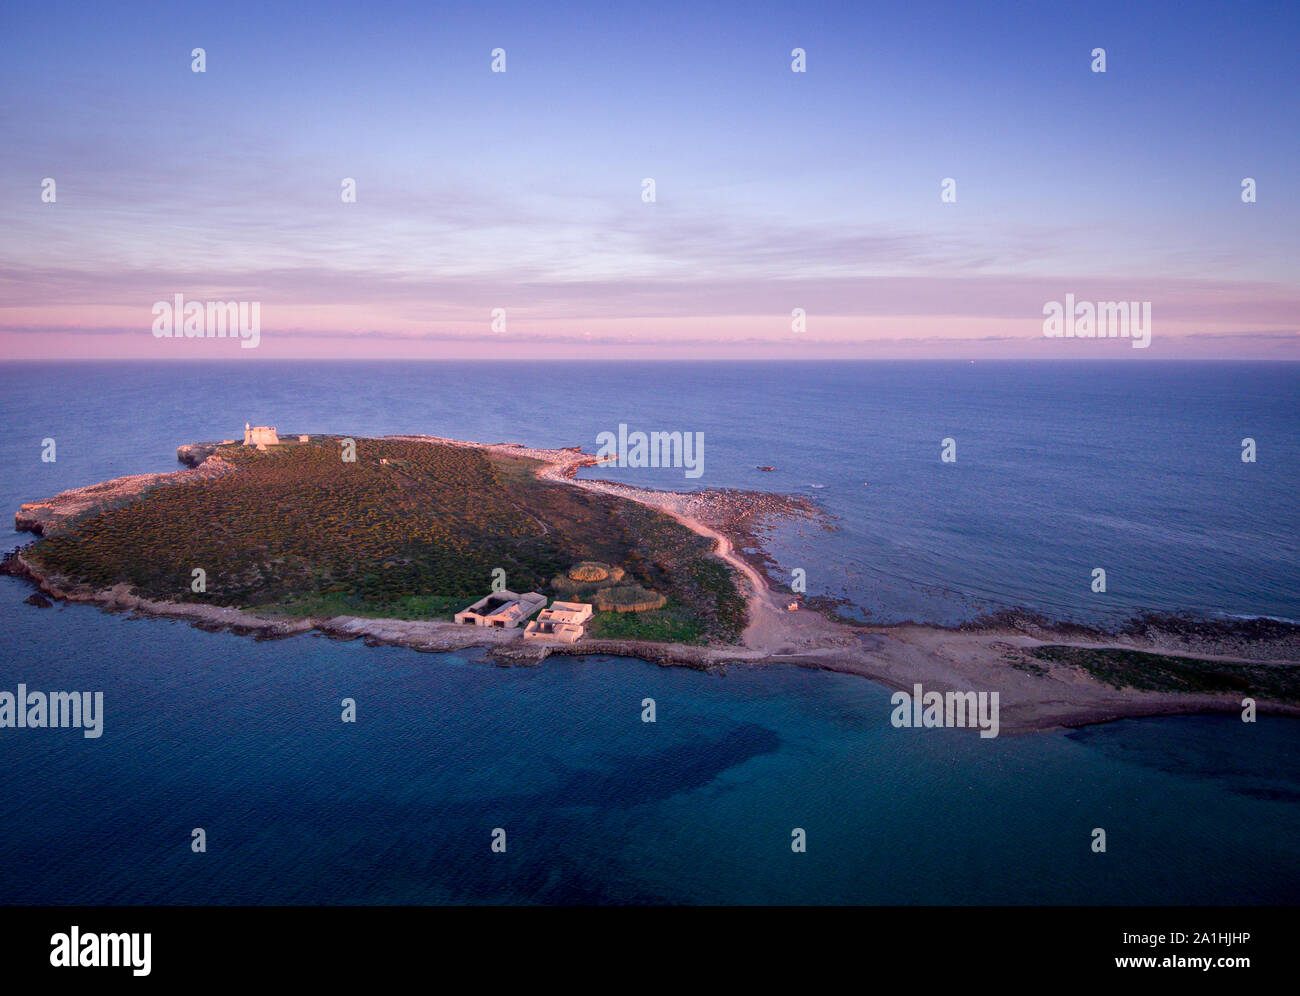 Wonderful aerial view at sunset of the island in front of Portopalo, a town in the south of Sicily. The shot is taken during a beautiful sunny day Stock Photo